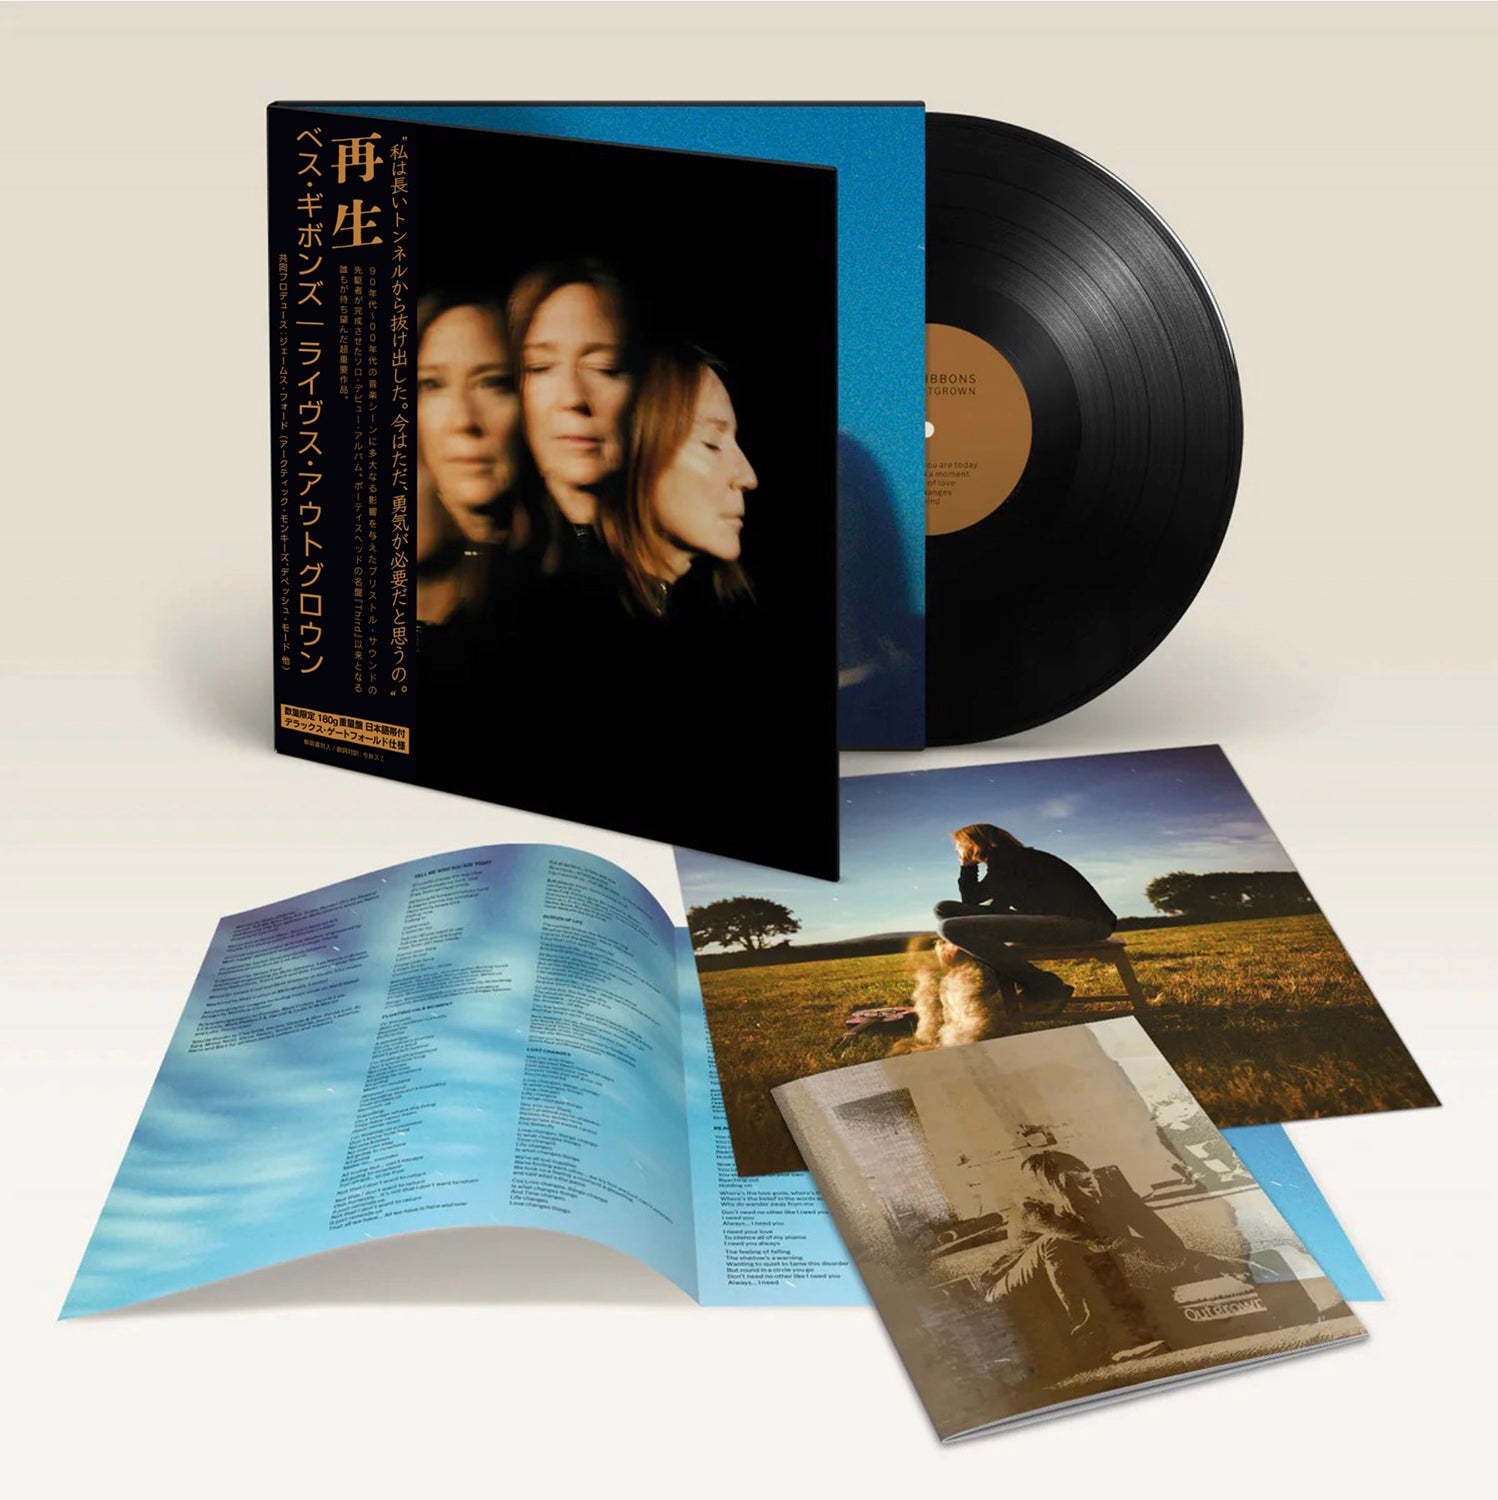 BETH GIBBONS 'LIVES OUTGROWN -LTD.JAPAN EDITION with ART PRINT'